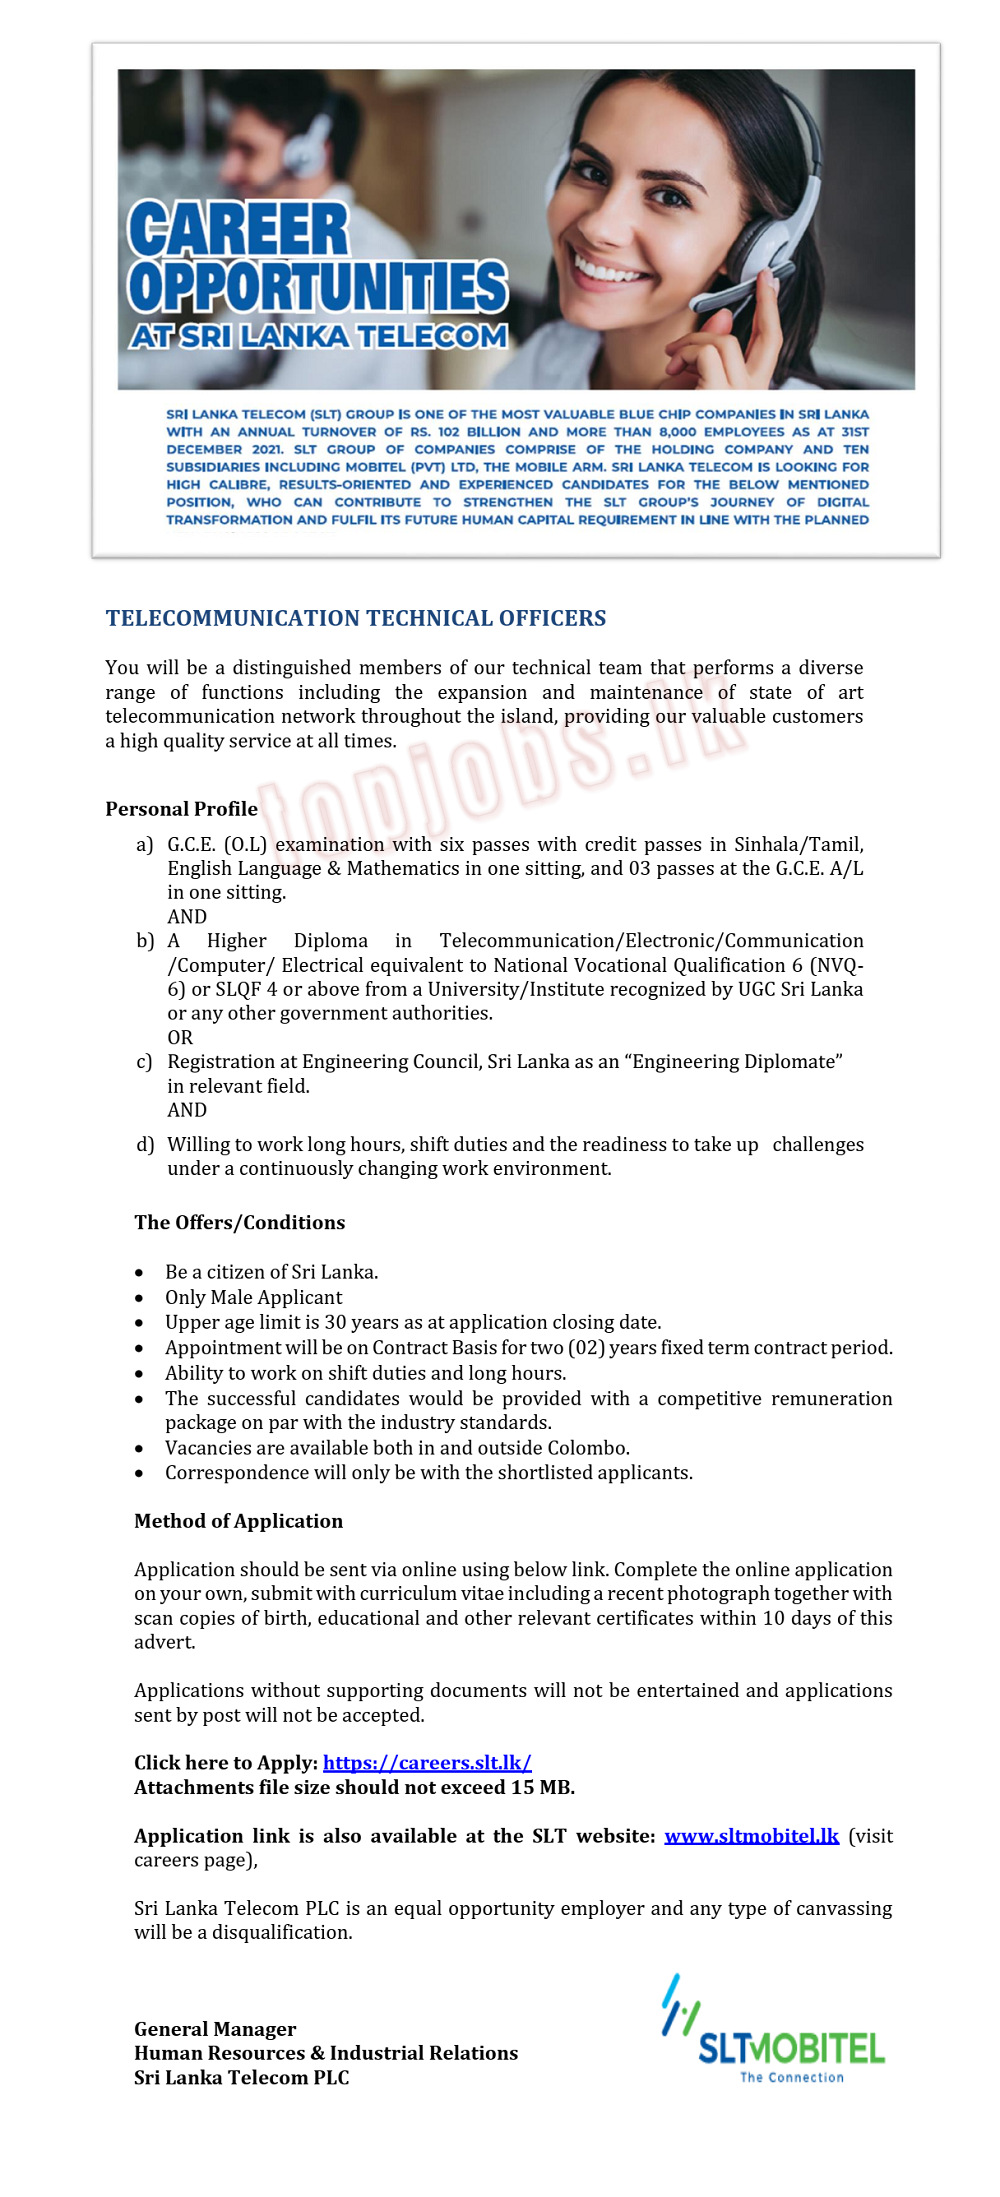 Telecommunication Technical Officers Vacancy